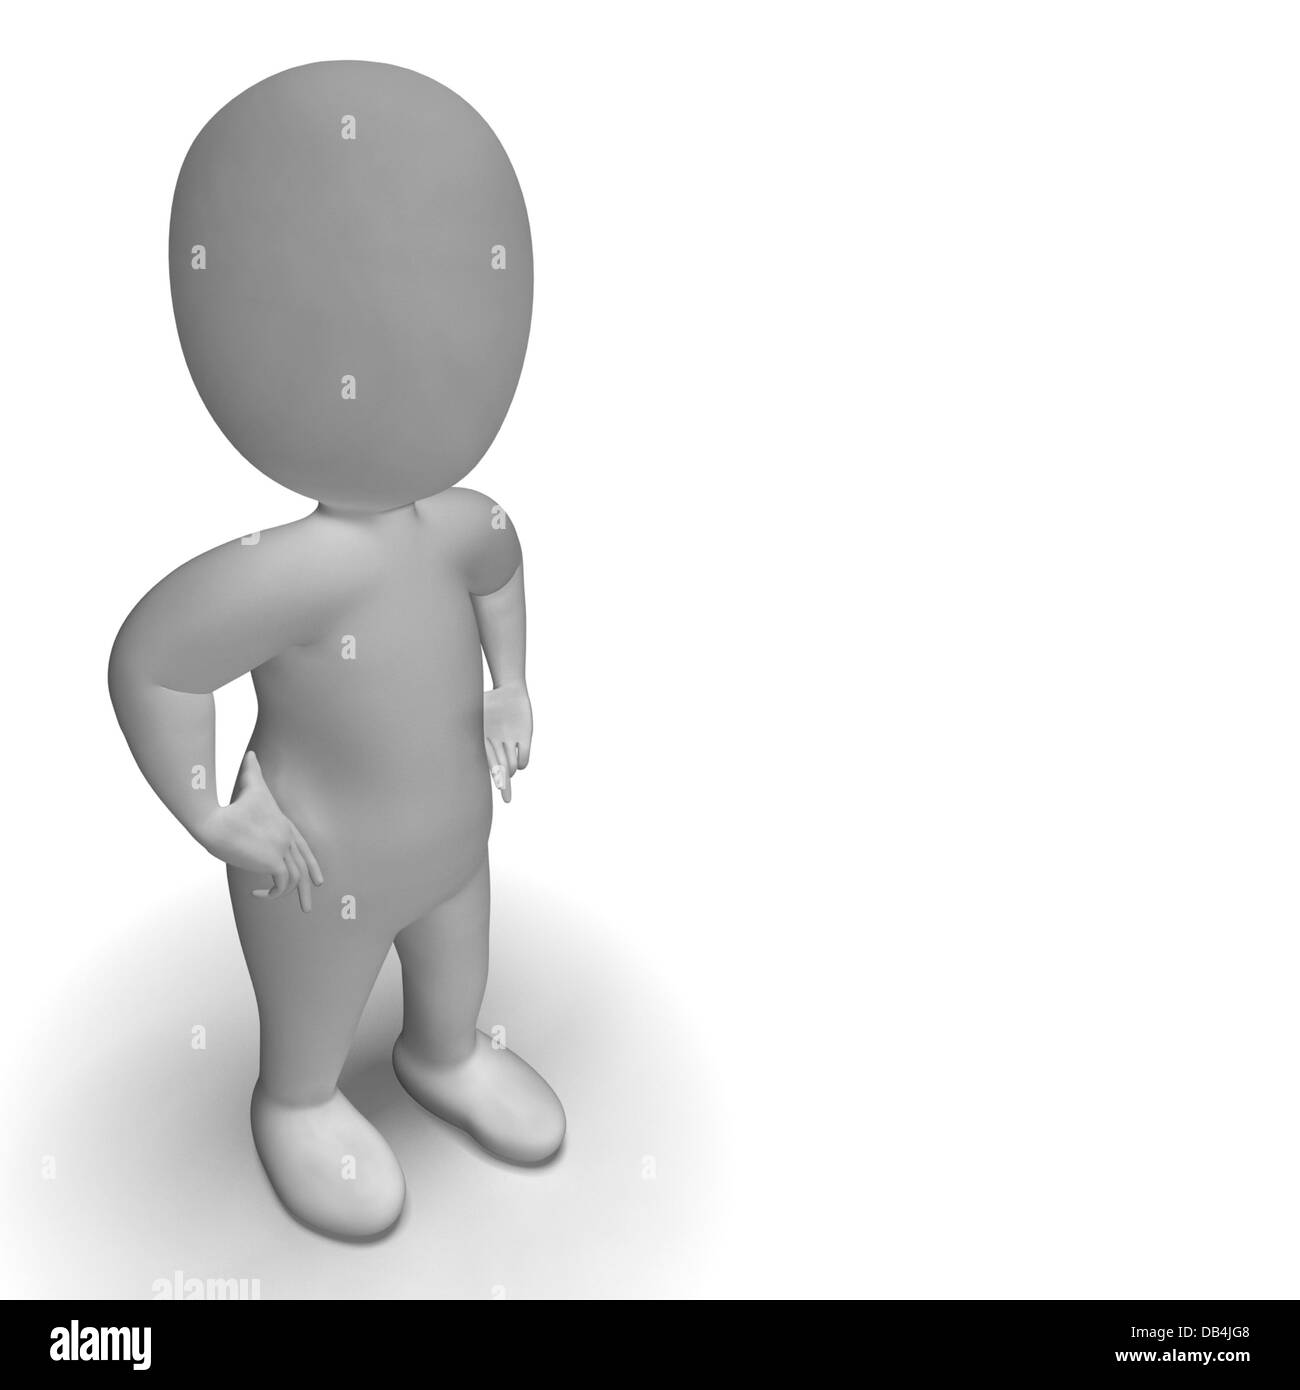 Cartoon character boy with hands on hips on white background. 3d